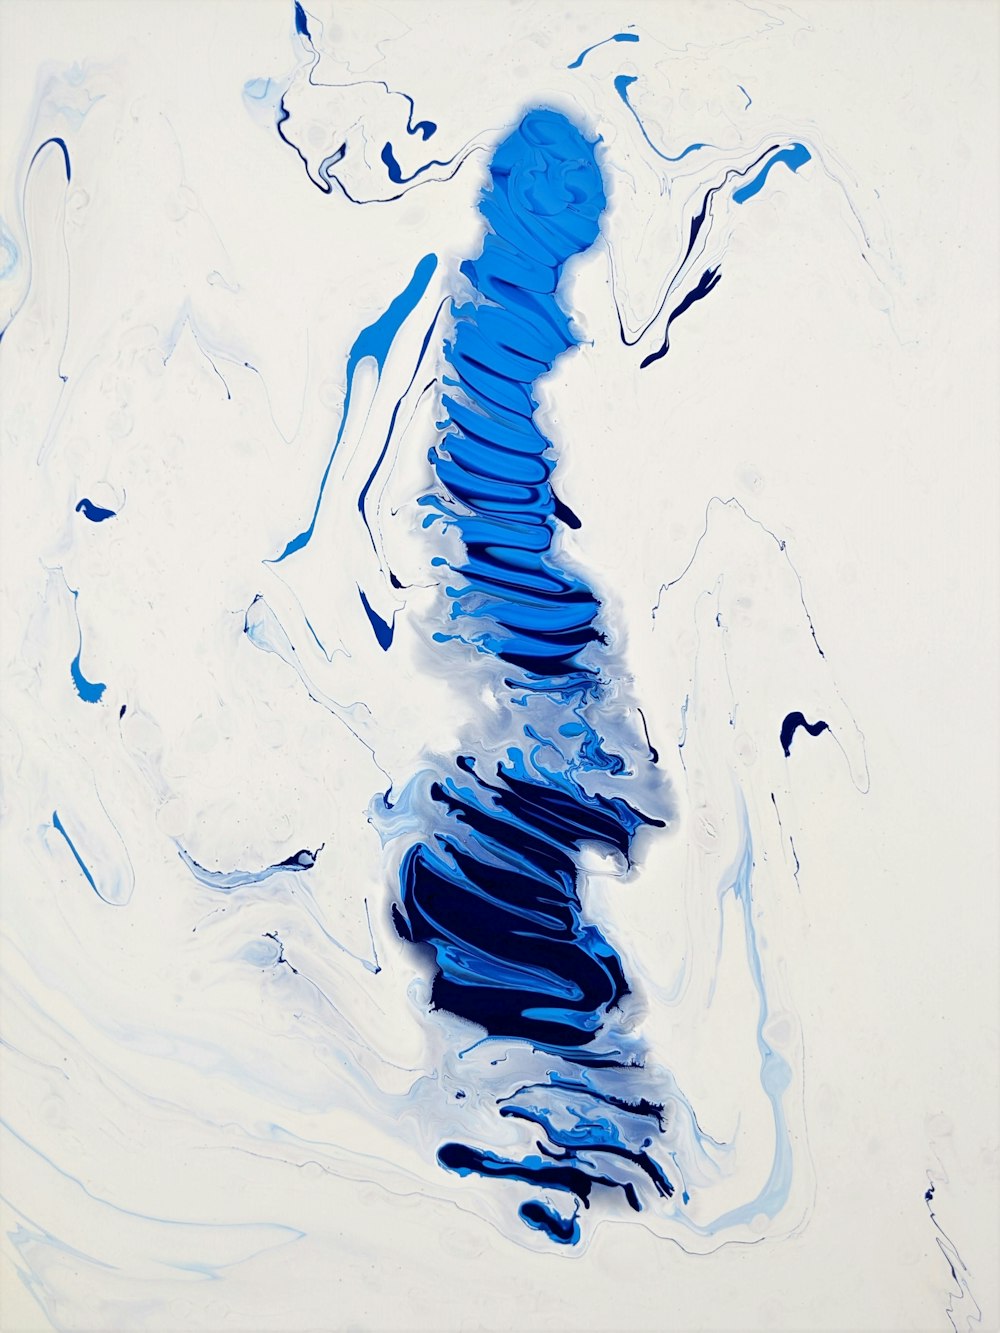 a painting with blue and white colors on a white background